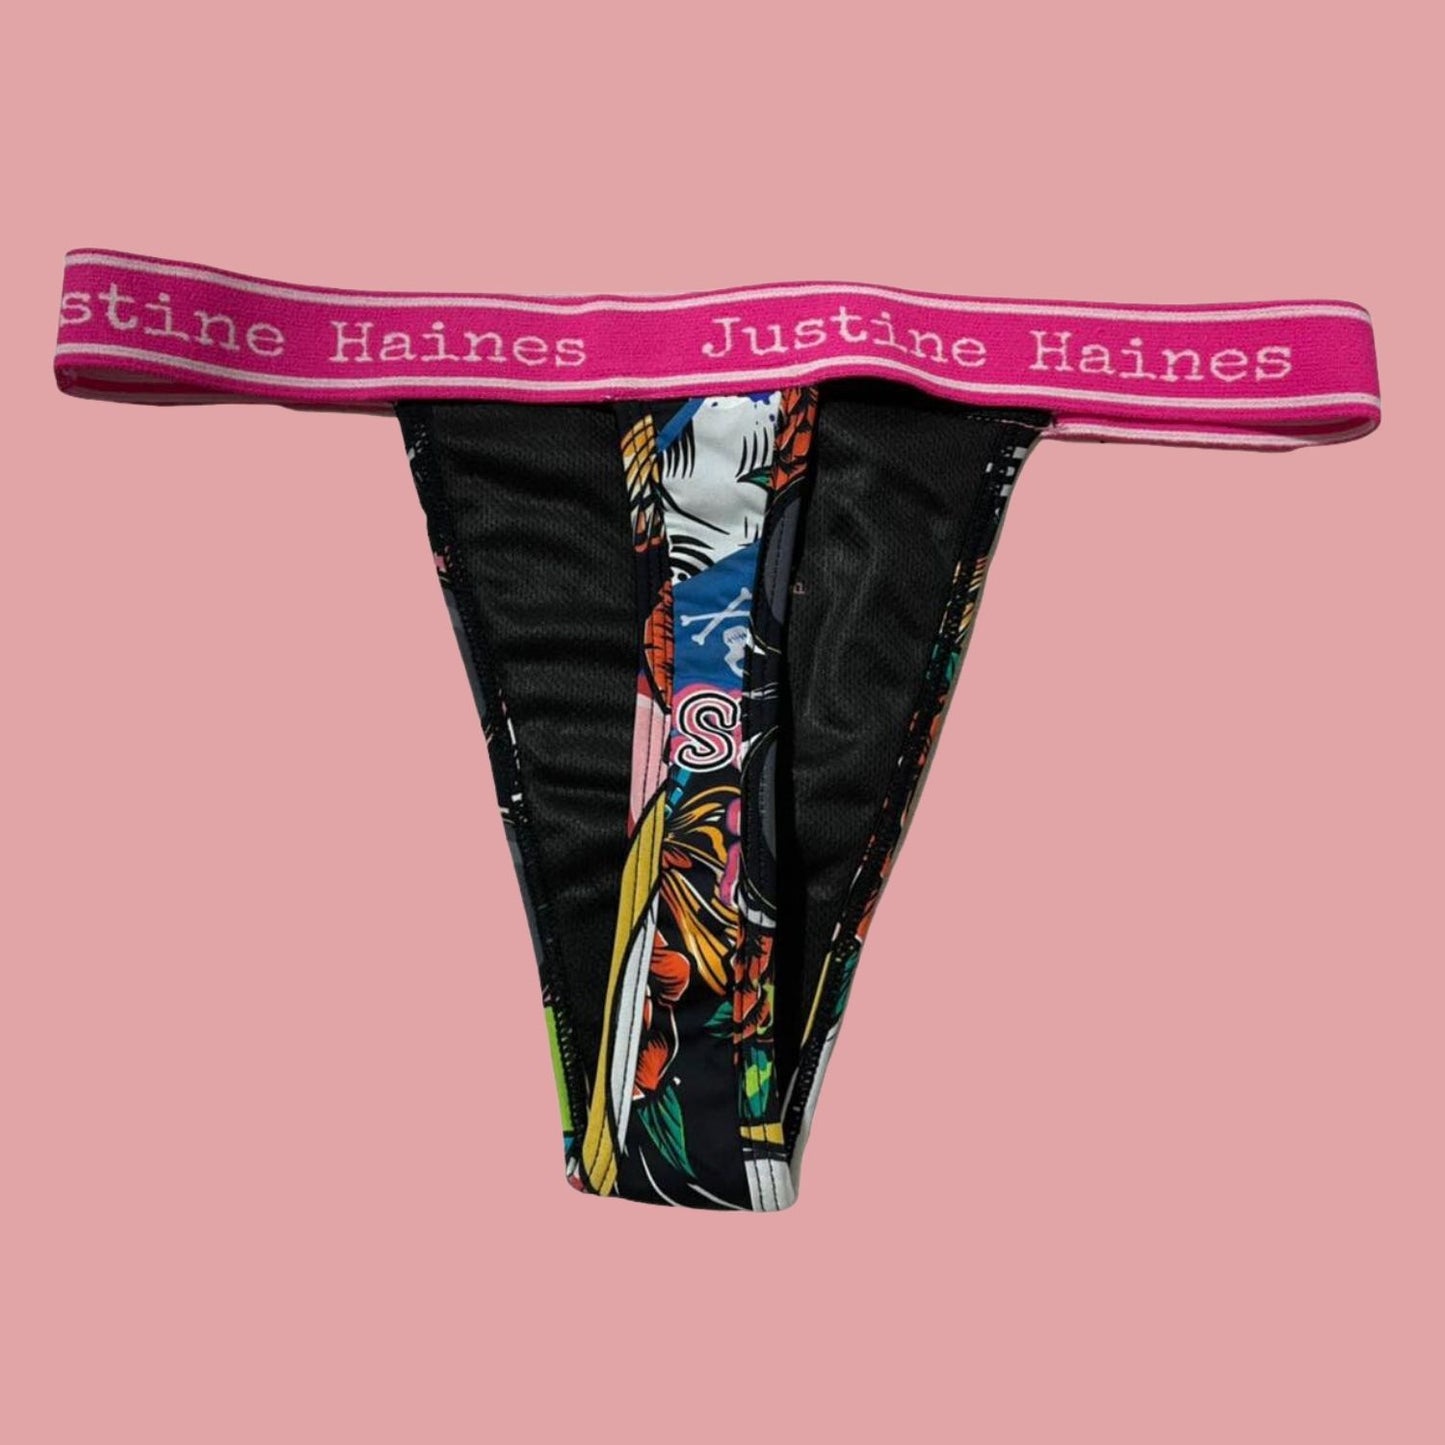 https://www.justinehaines.com/products/wear-thongs-on-your-period-skulls-roses